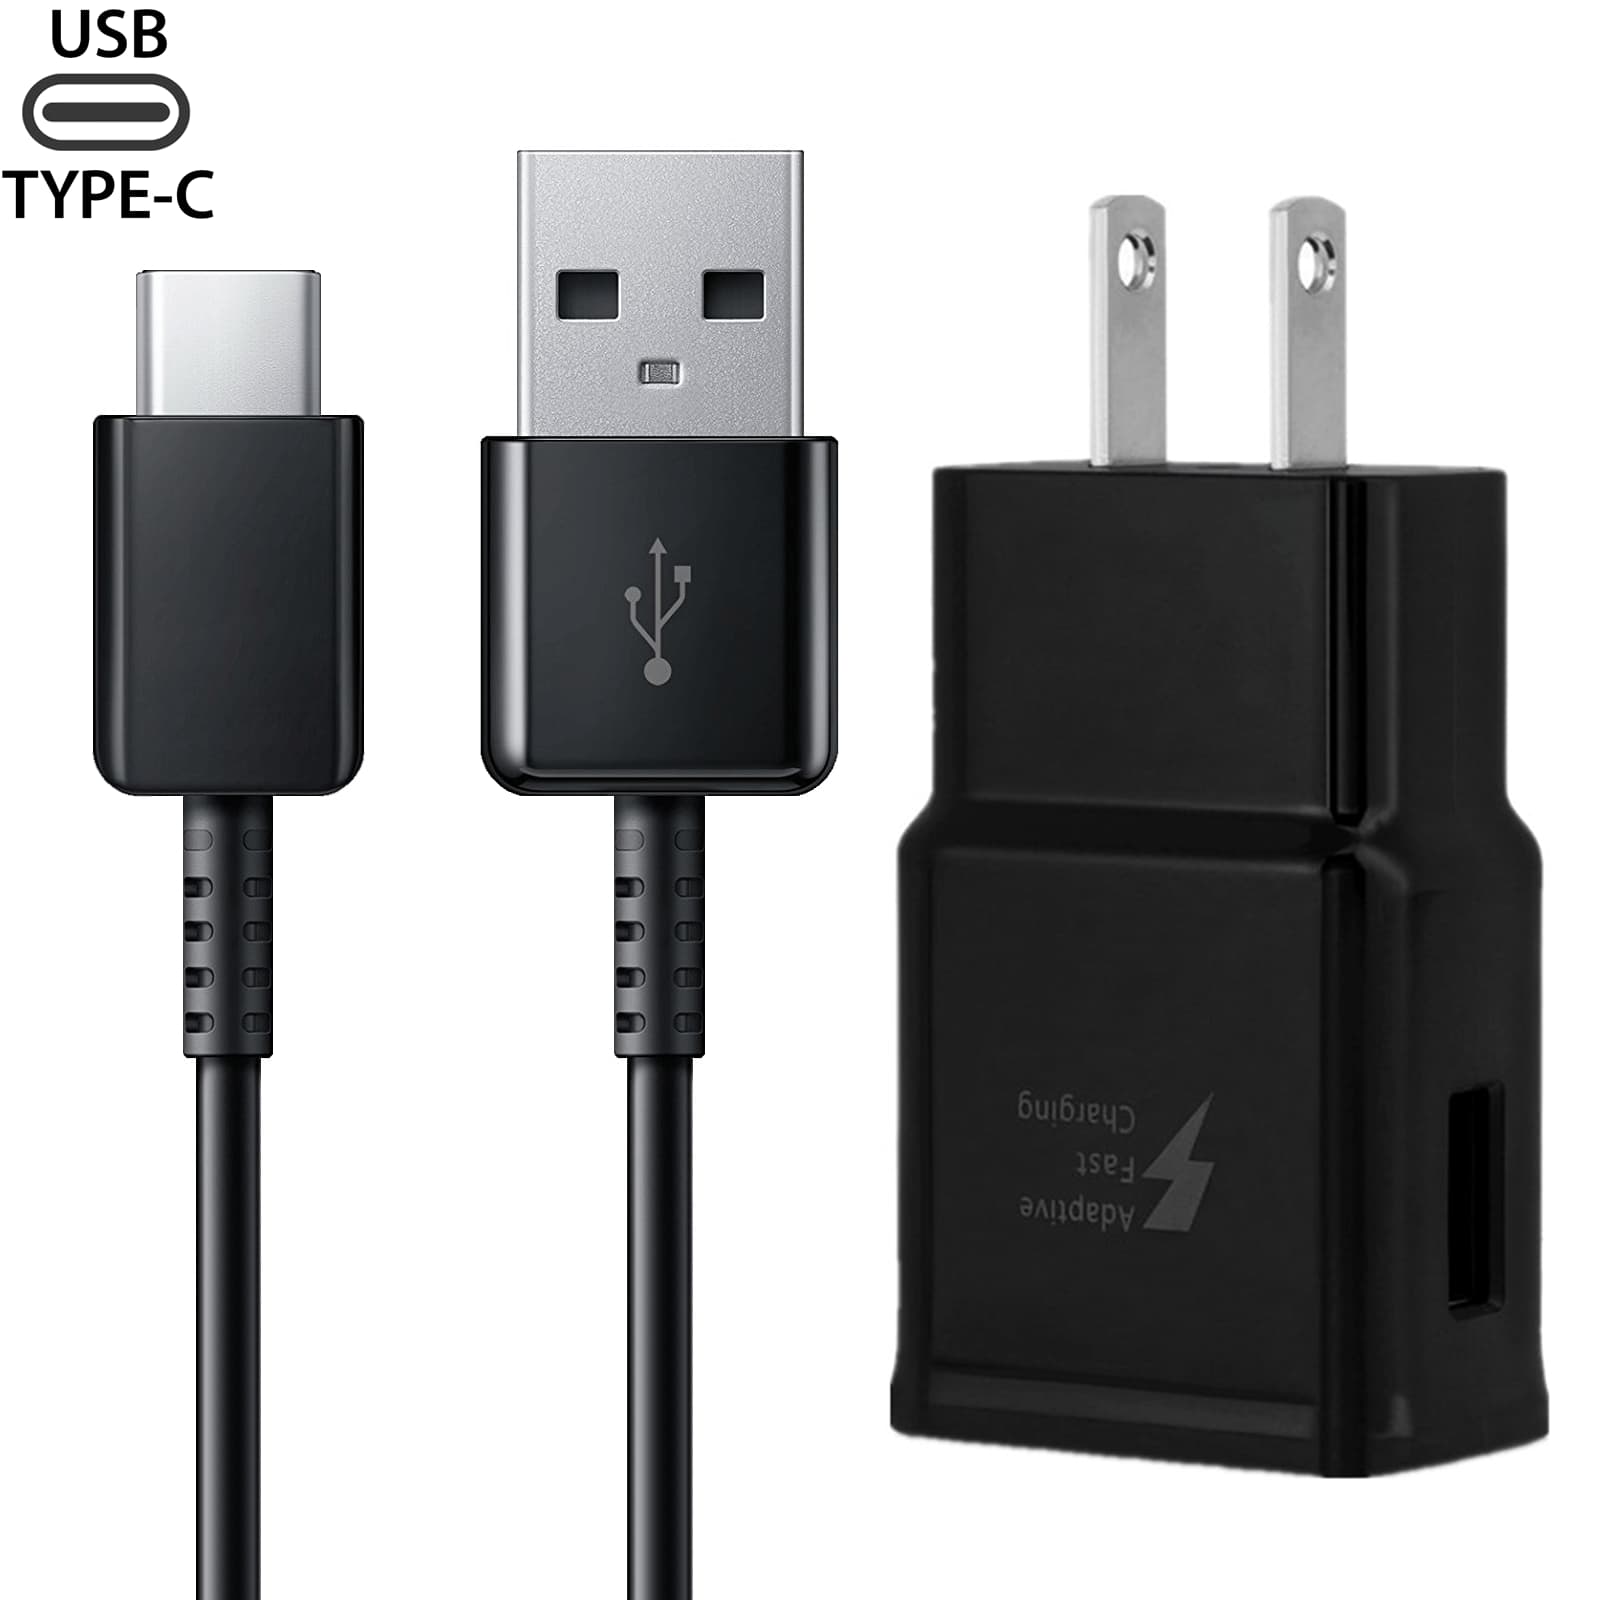 S9+ Note 8 S10 Plus Samsung Adaptive Fast Wall Charger with USB Type C Cable Compatible with Galaxy S10 S 8 Plus Note 9 S8 Active S8+ S 9 Plus S9 S8 LG and All Devices 